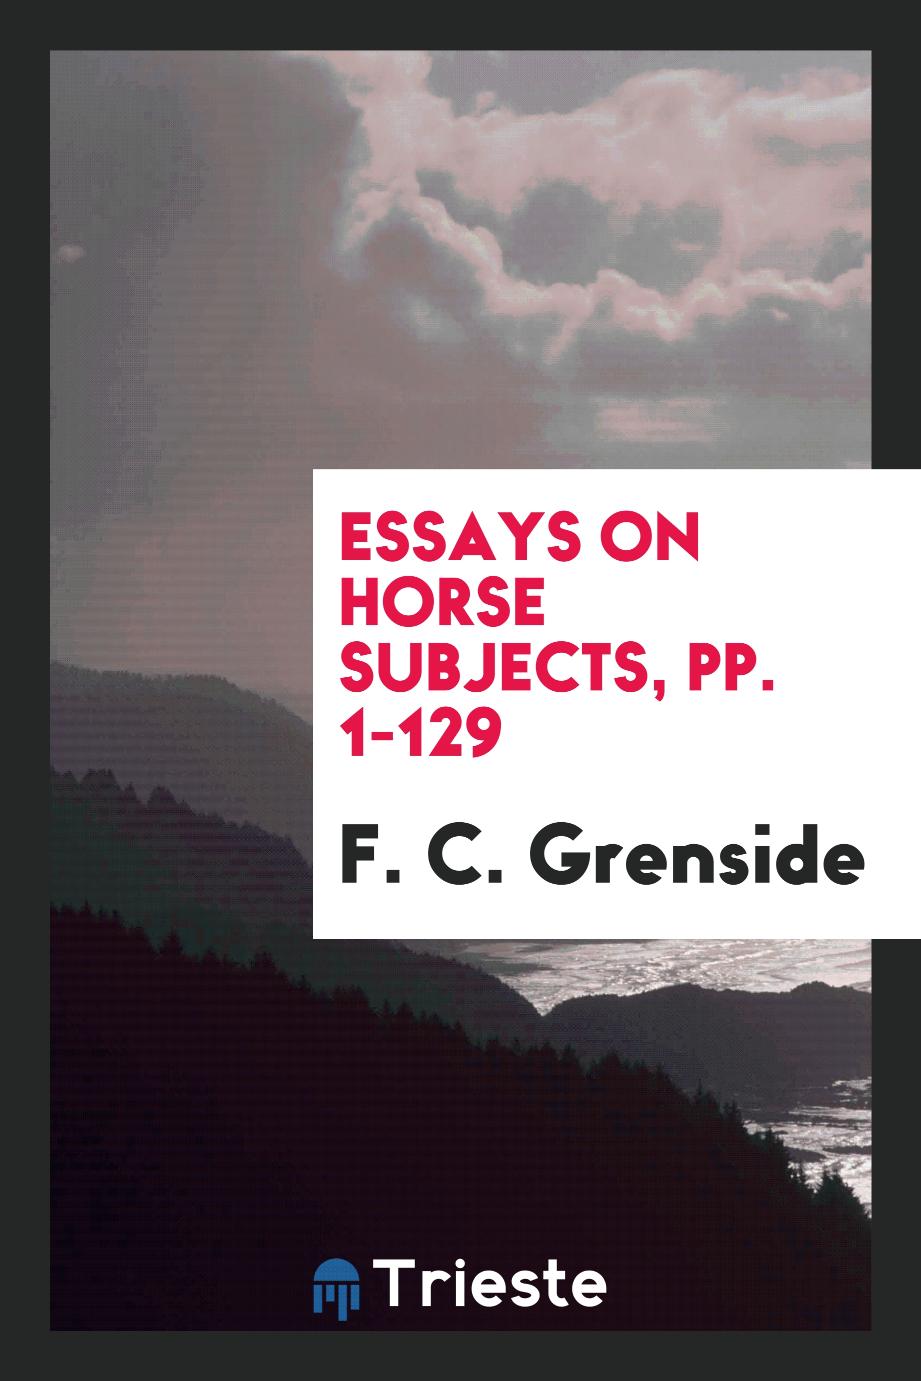 Essays on Horse Subjects, pp. 1-129